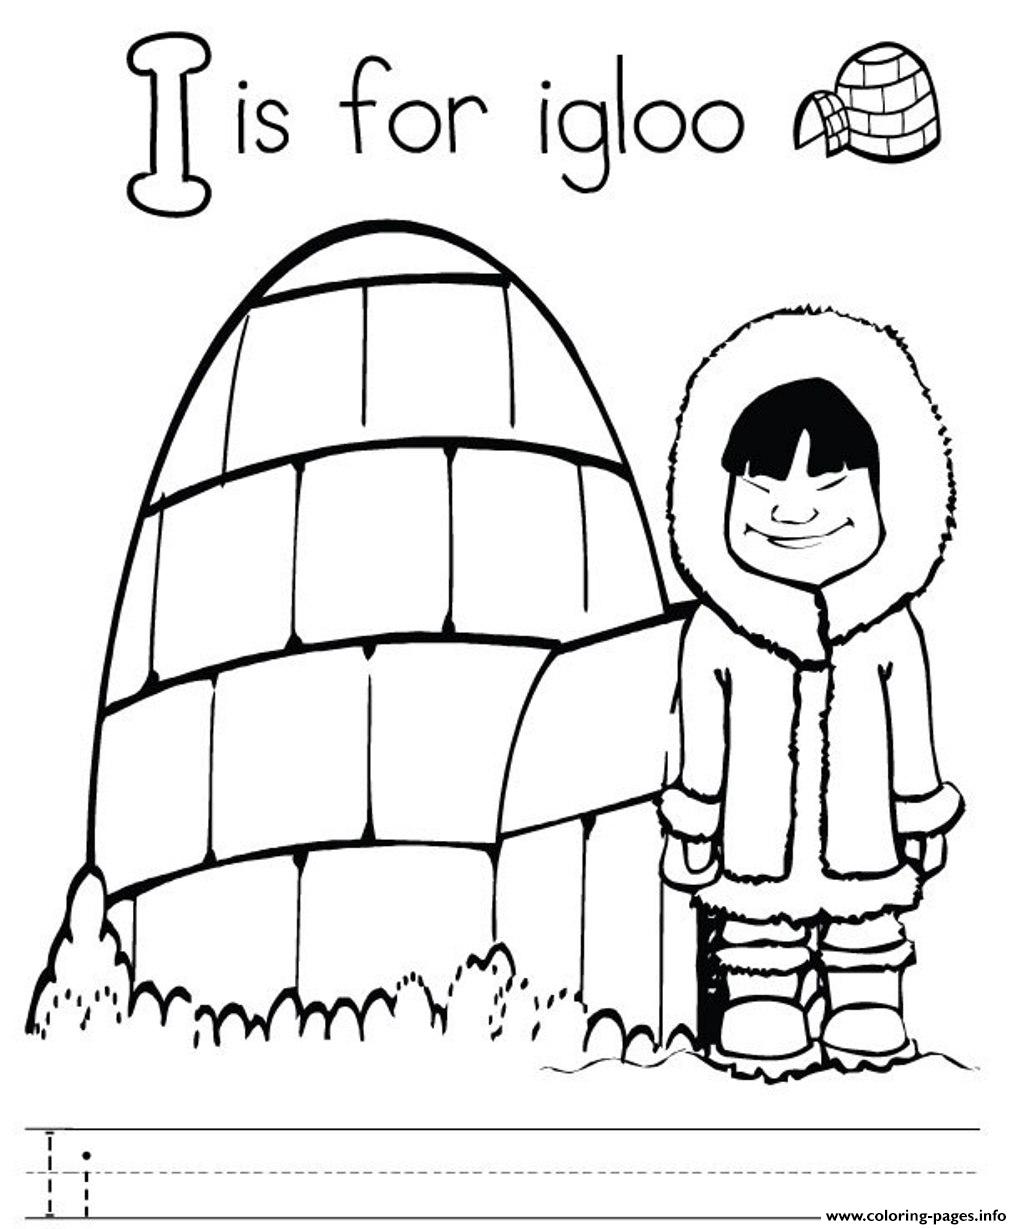 images of igloo for coloring book pages - photo #21